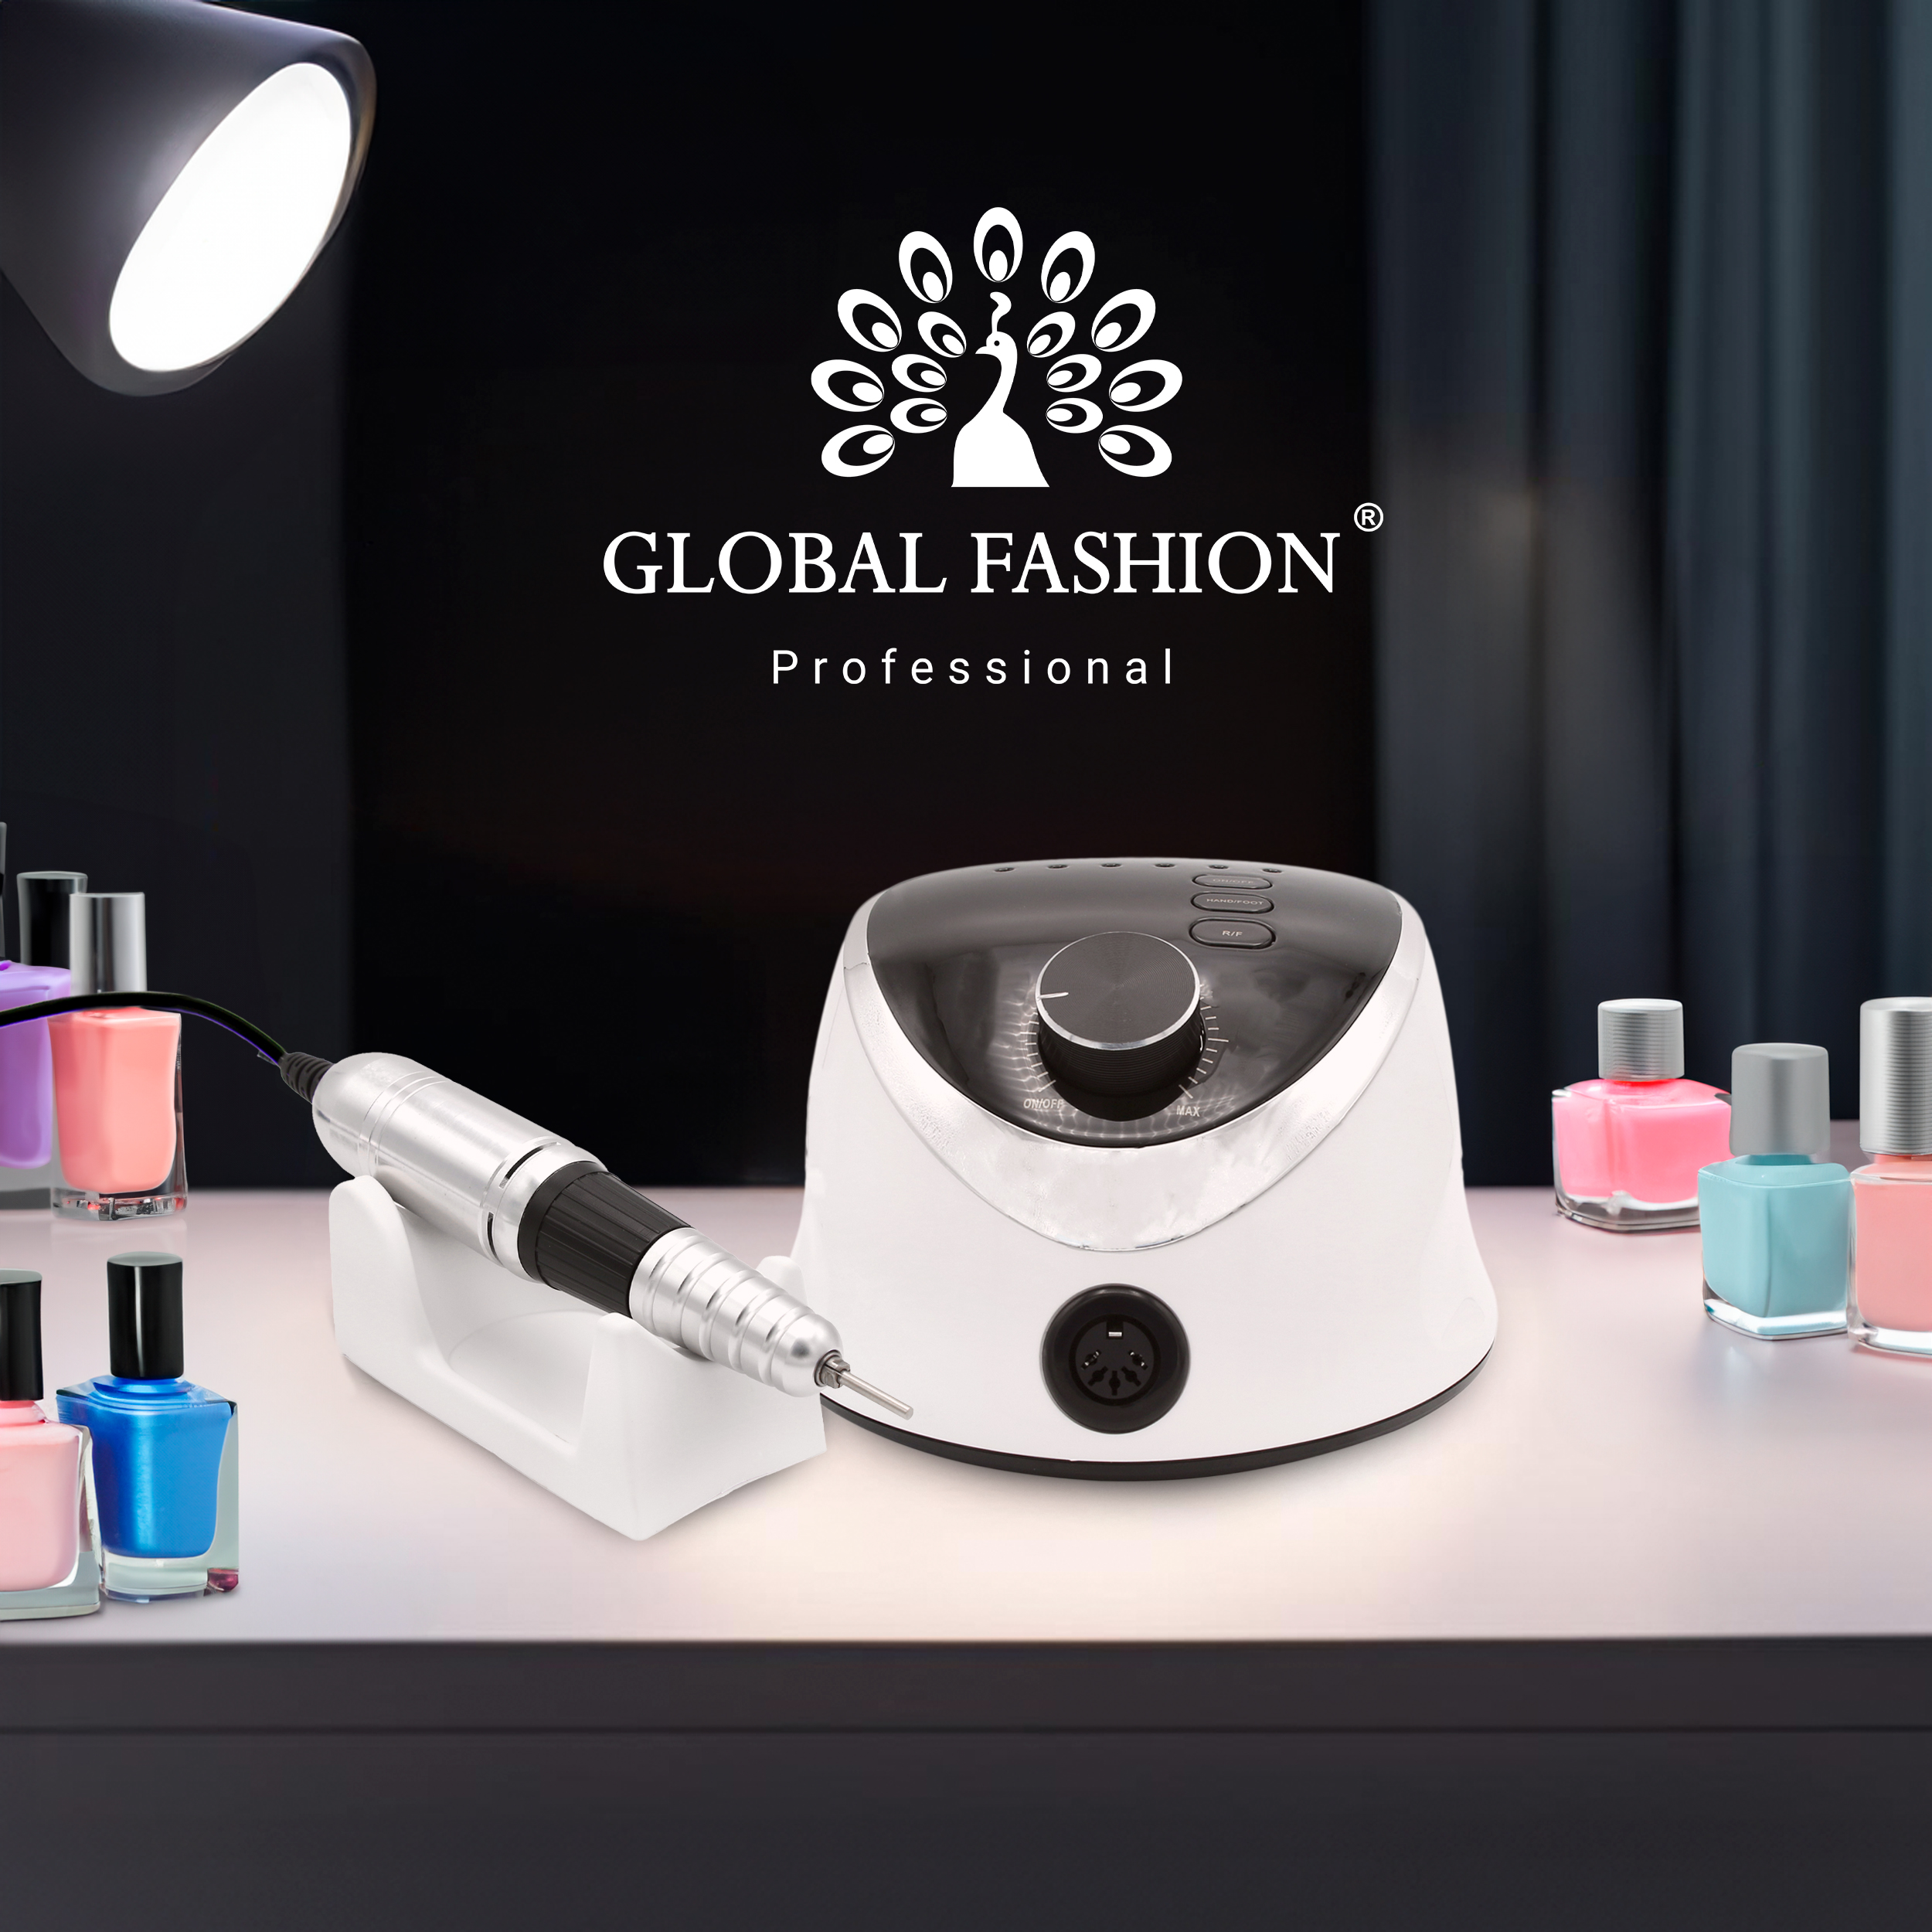 Professional M12 electric nail drill Global Fashion 68w 35000 rpm - top product from Global Fashion